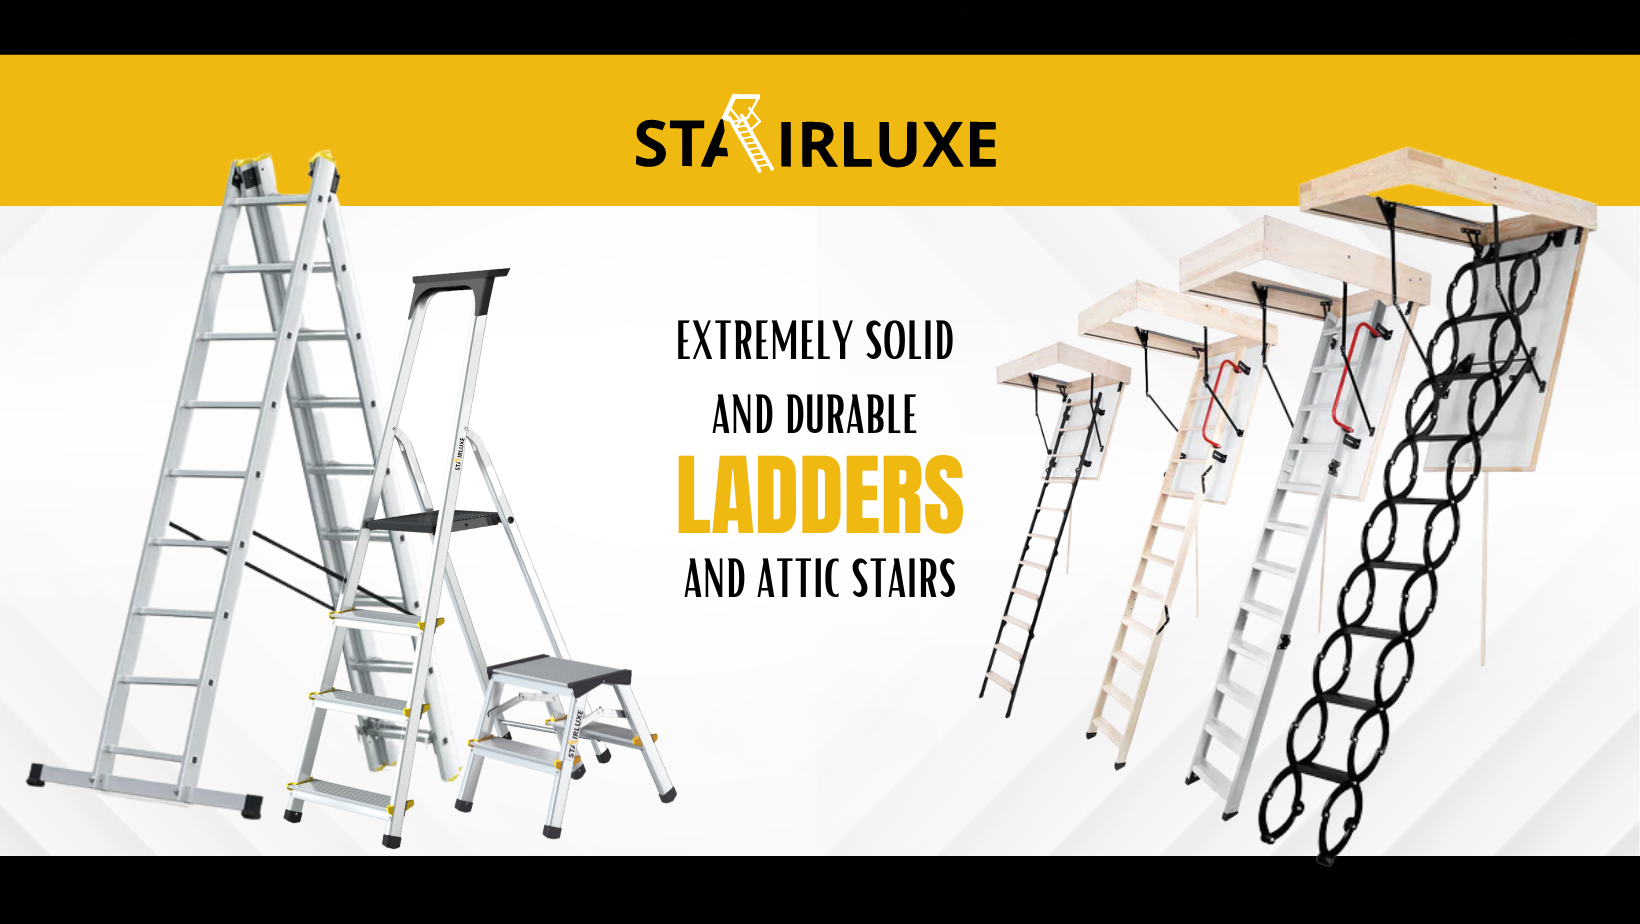 Load video: See our New Line of Stairluxe Step Ladders